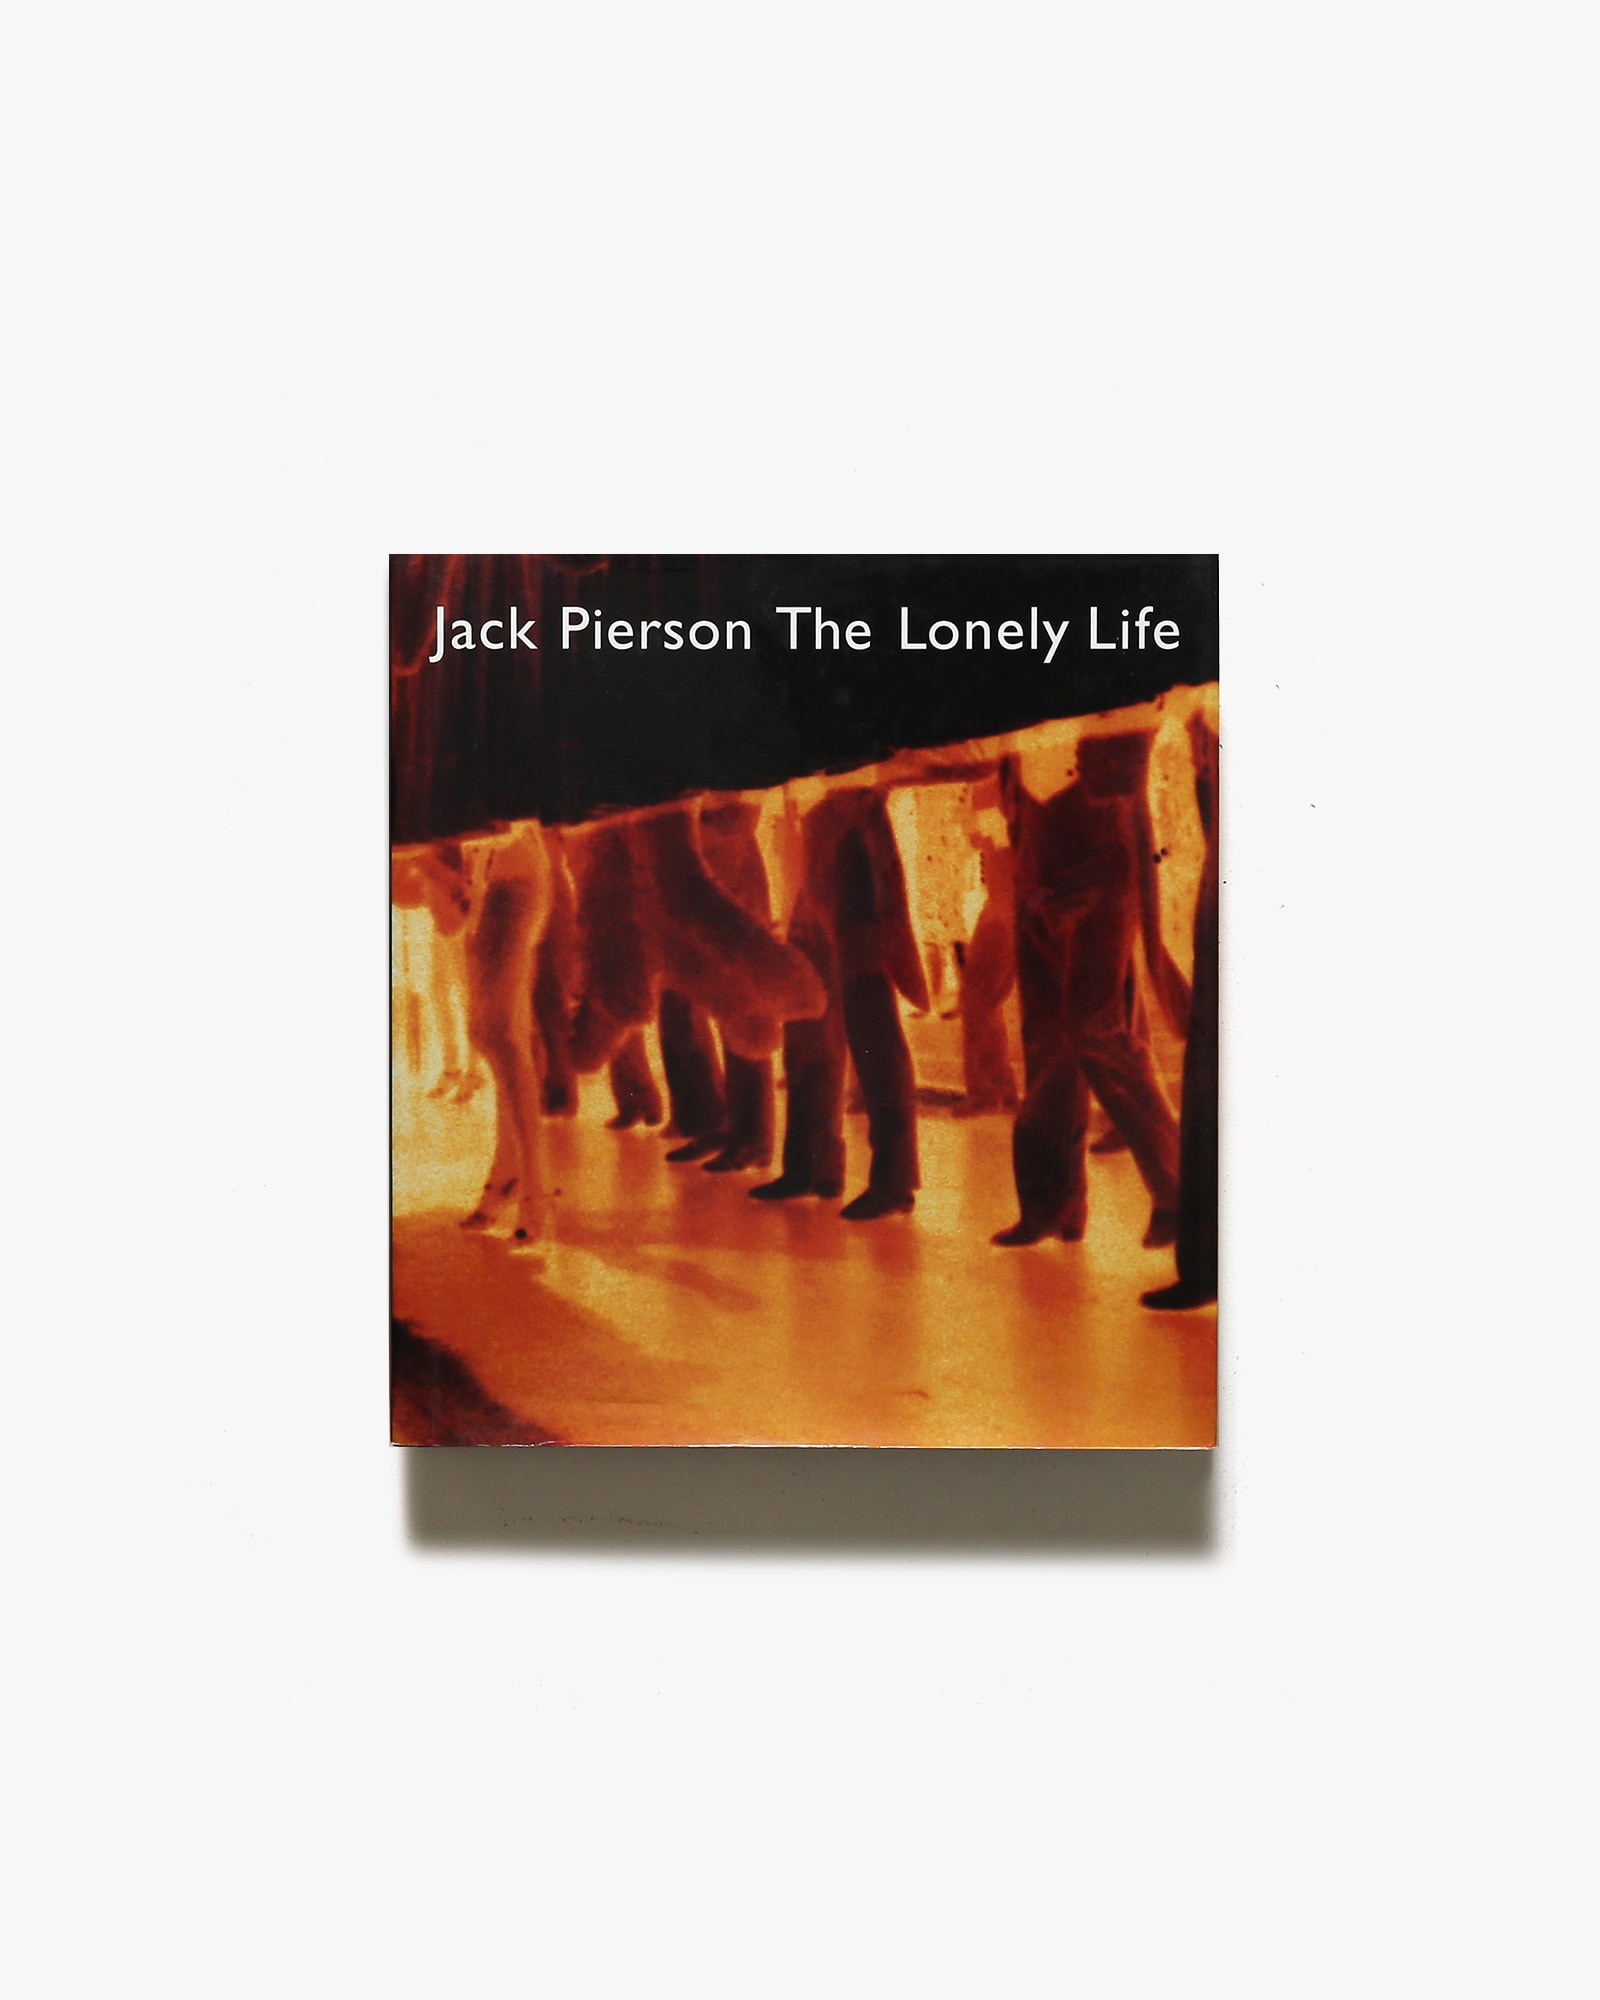 Jack Pierson: The Lonely Life